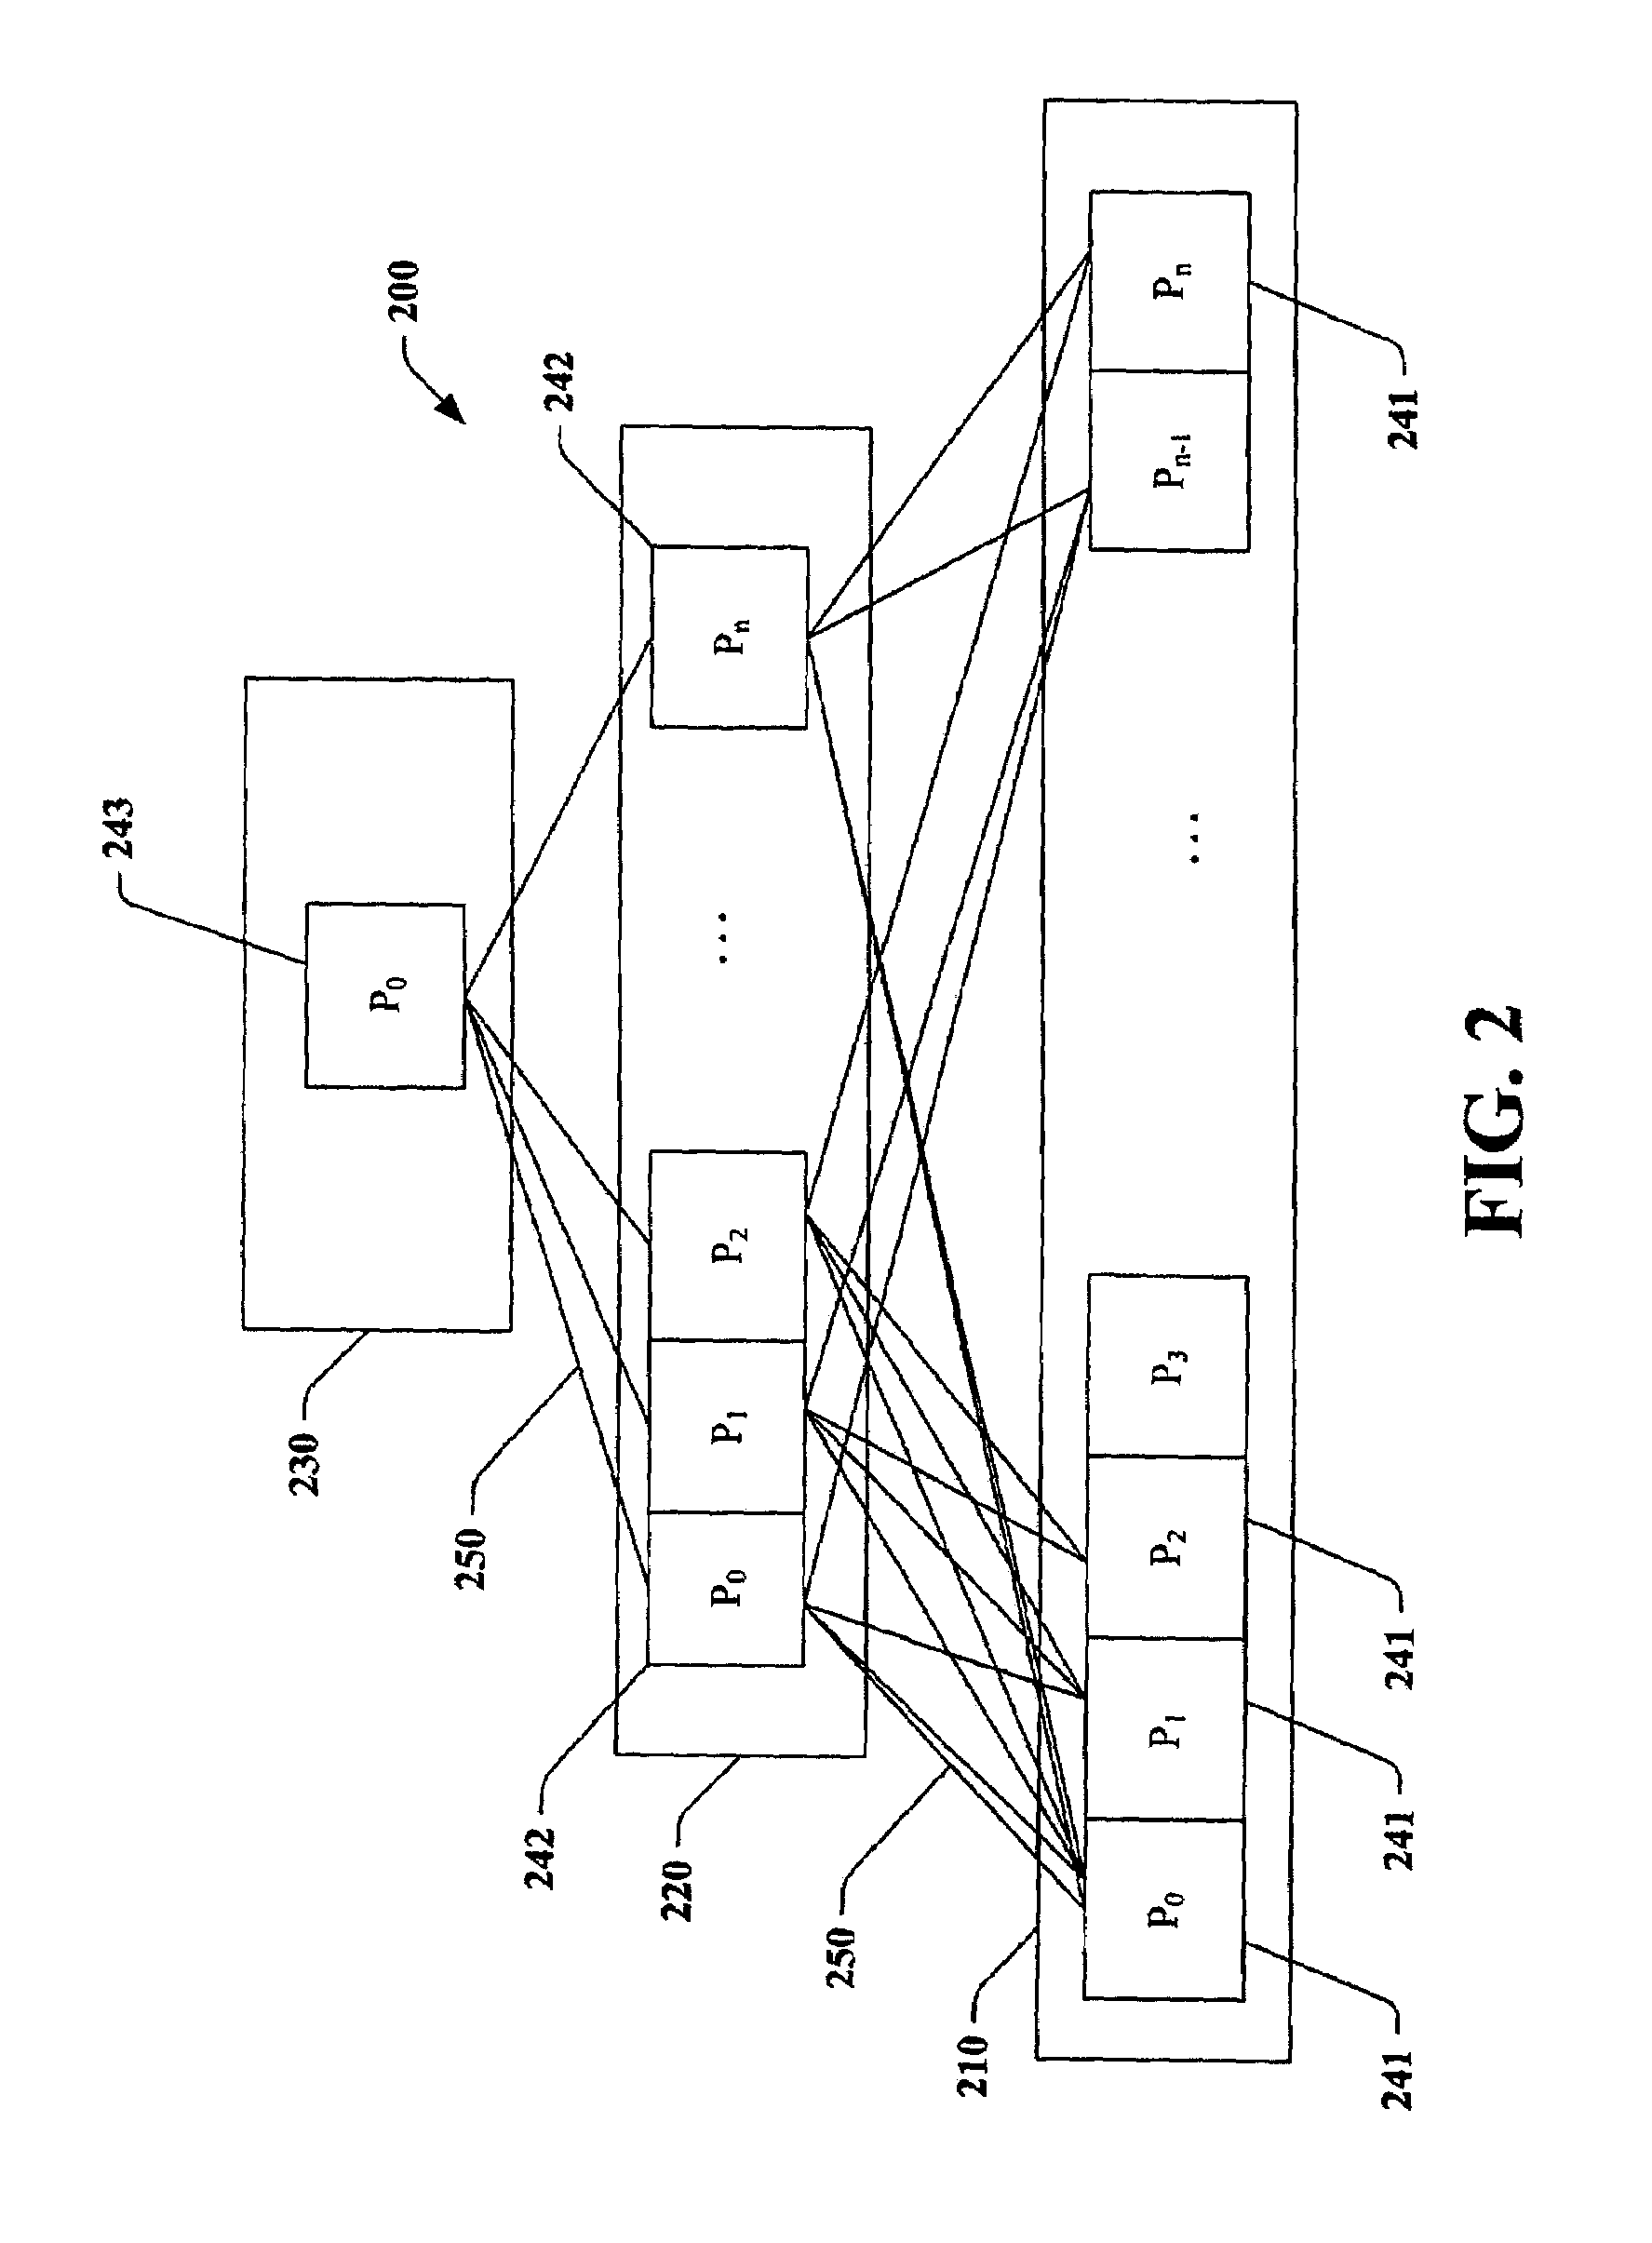 Machine learning system and method for ranking sets of data using a pairing cost function